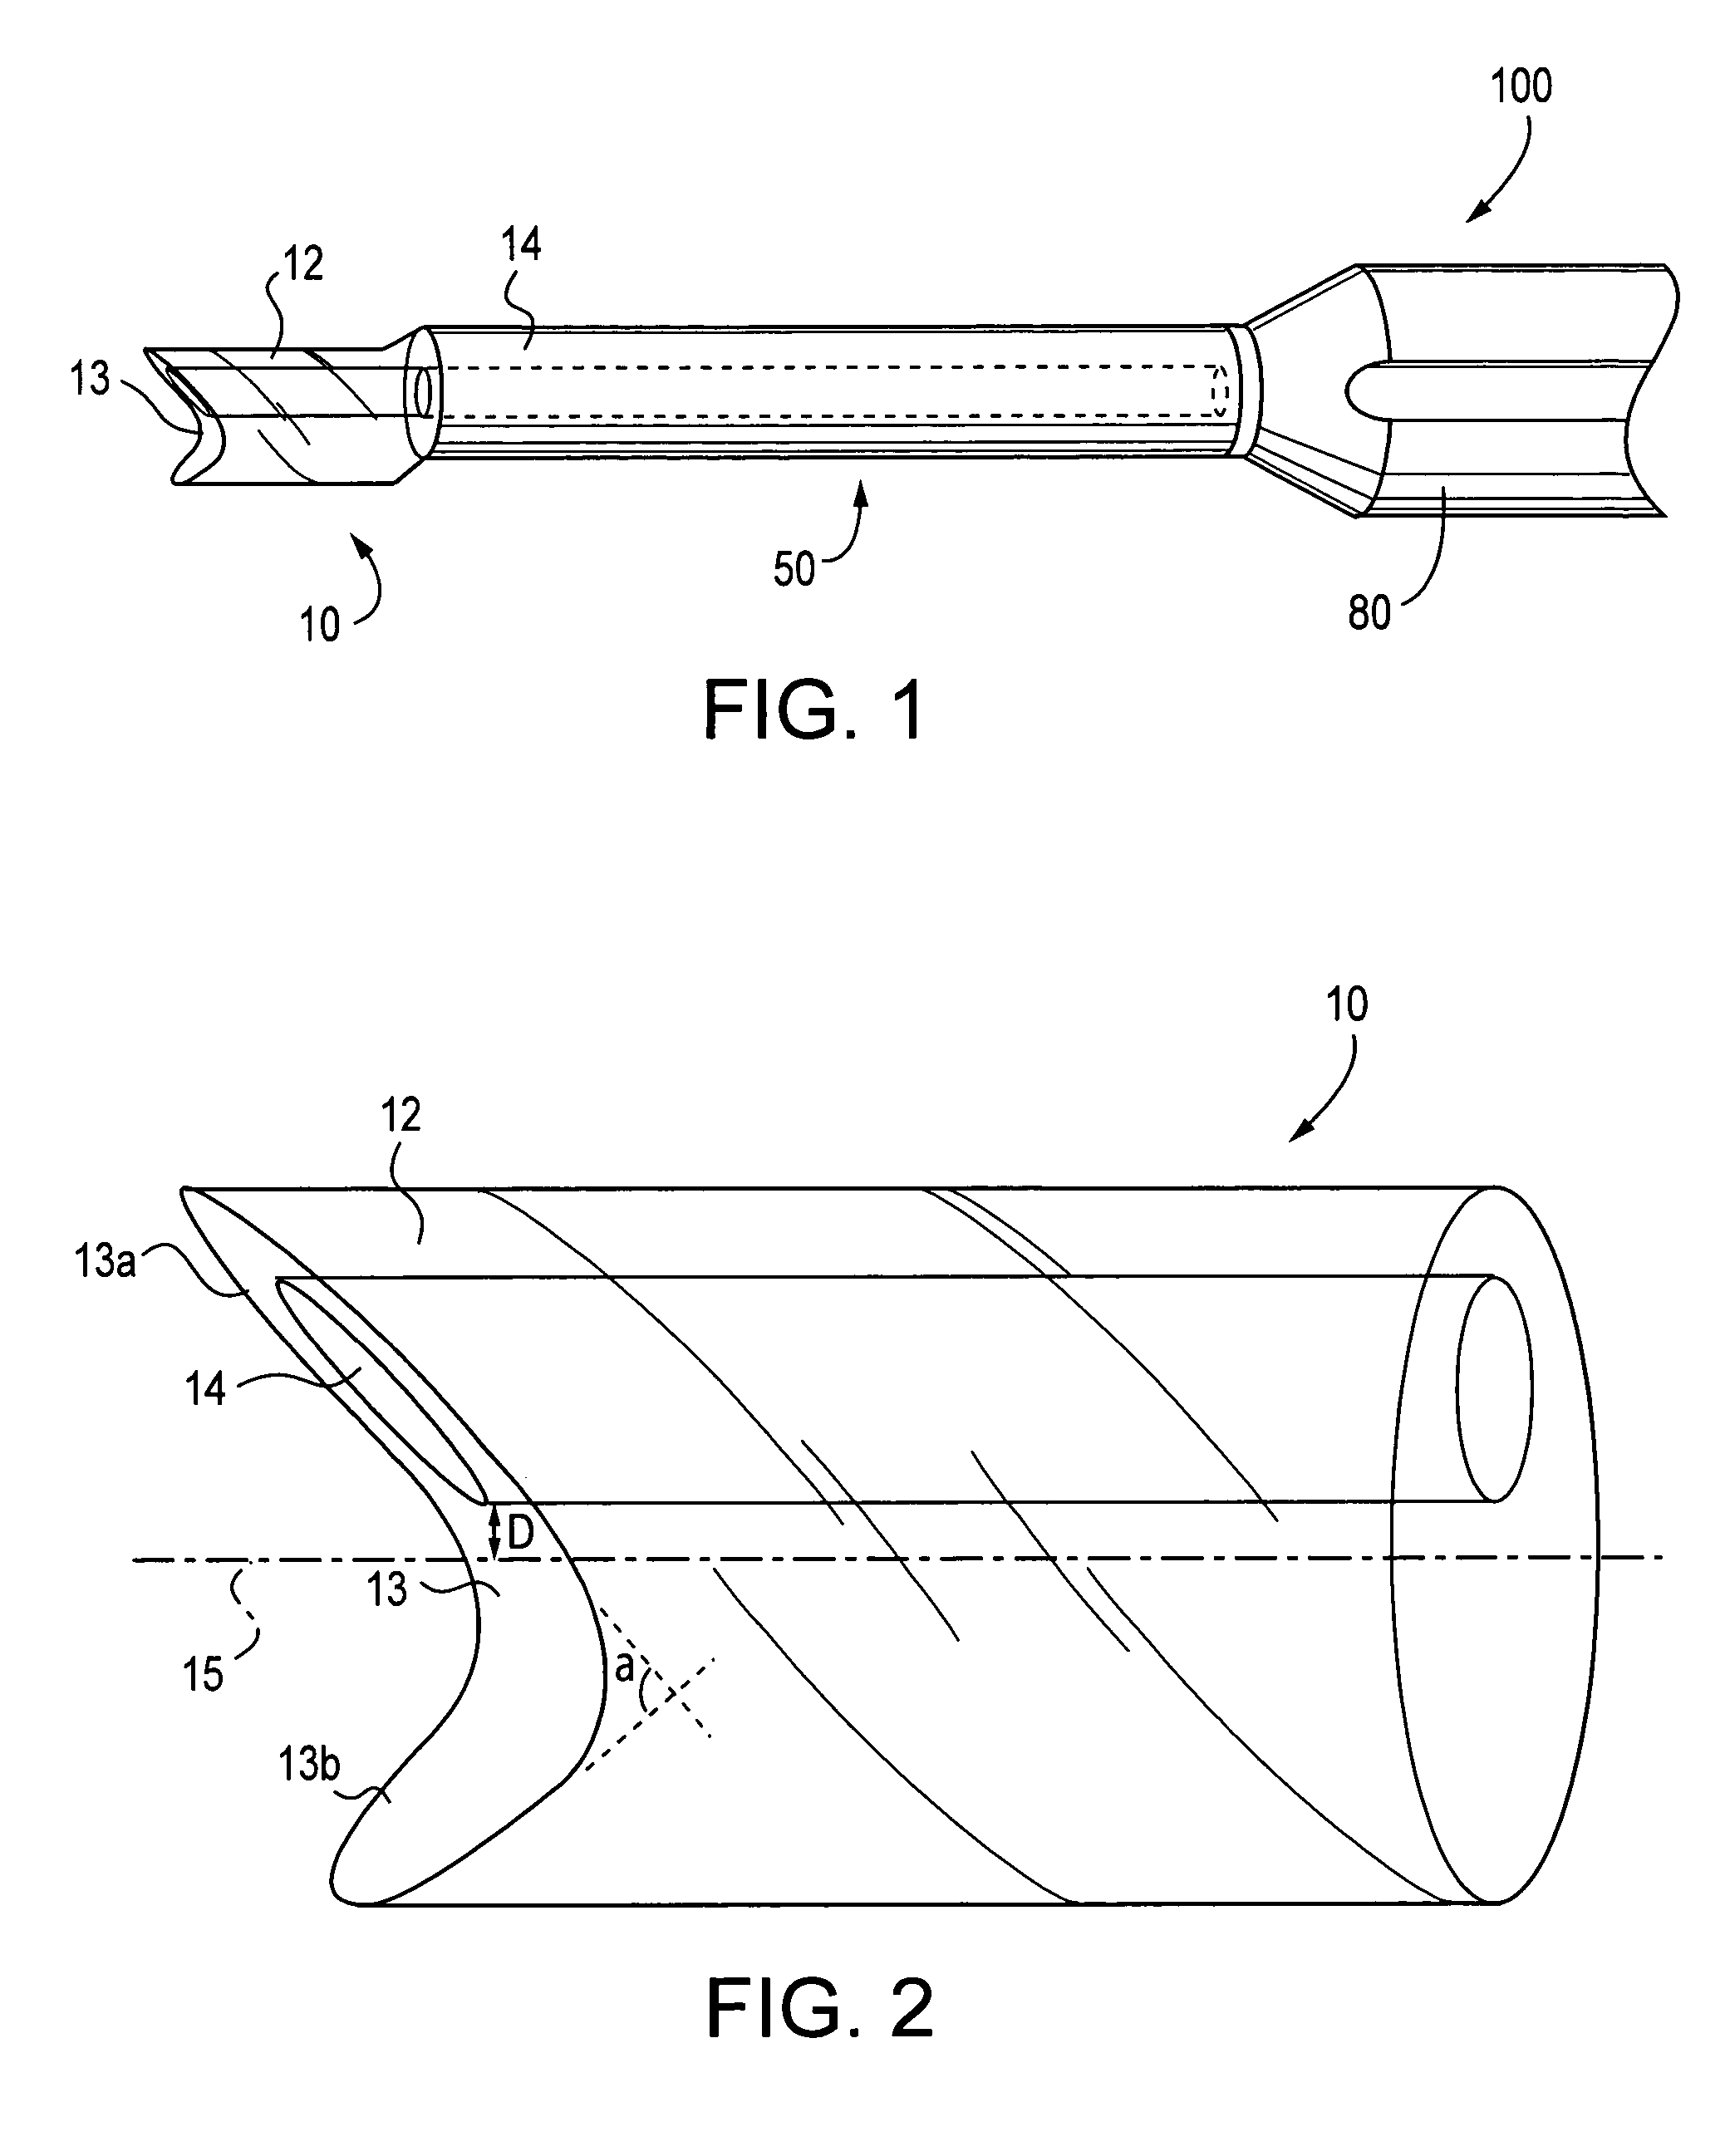 Method of using offset drill guide in arthroscopic surgery